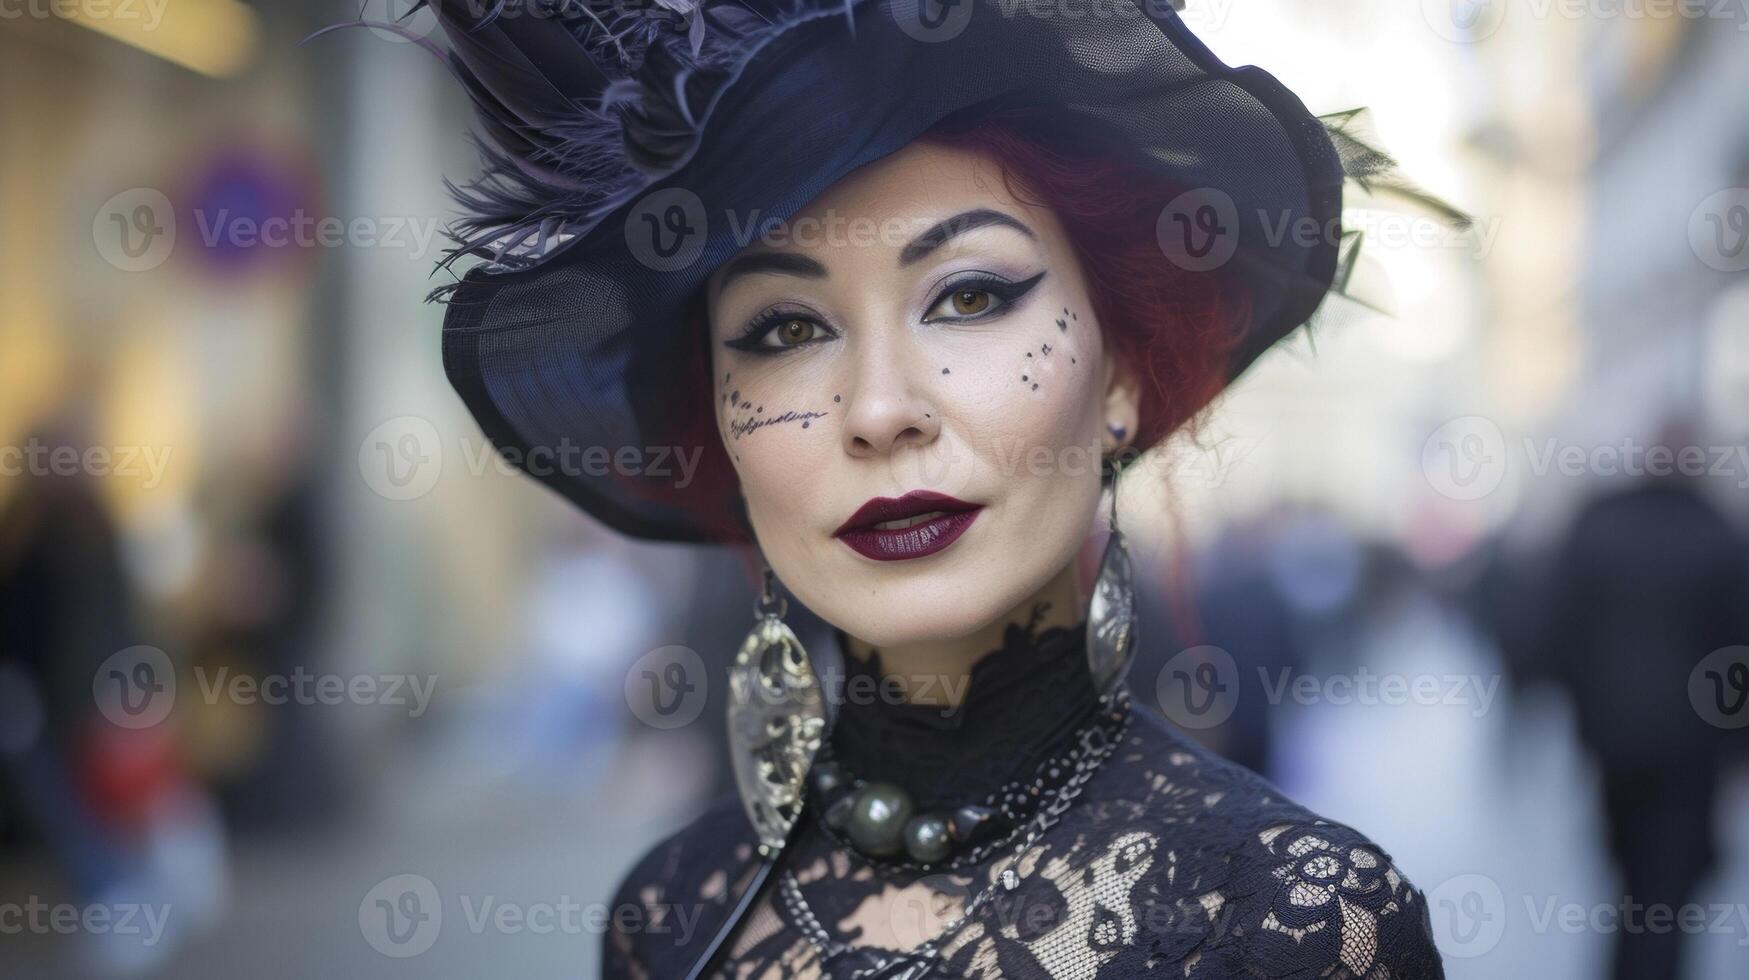 On the streets of the city a gothic fashionista turns heads in a black lace top vibrant red lipstick and a statement hat adorned with feathers photo